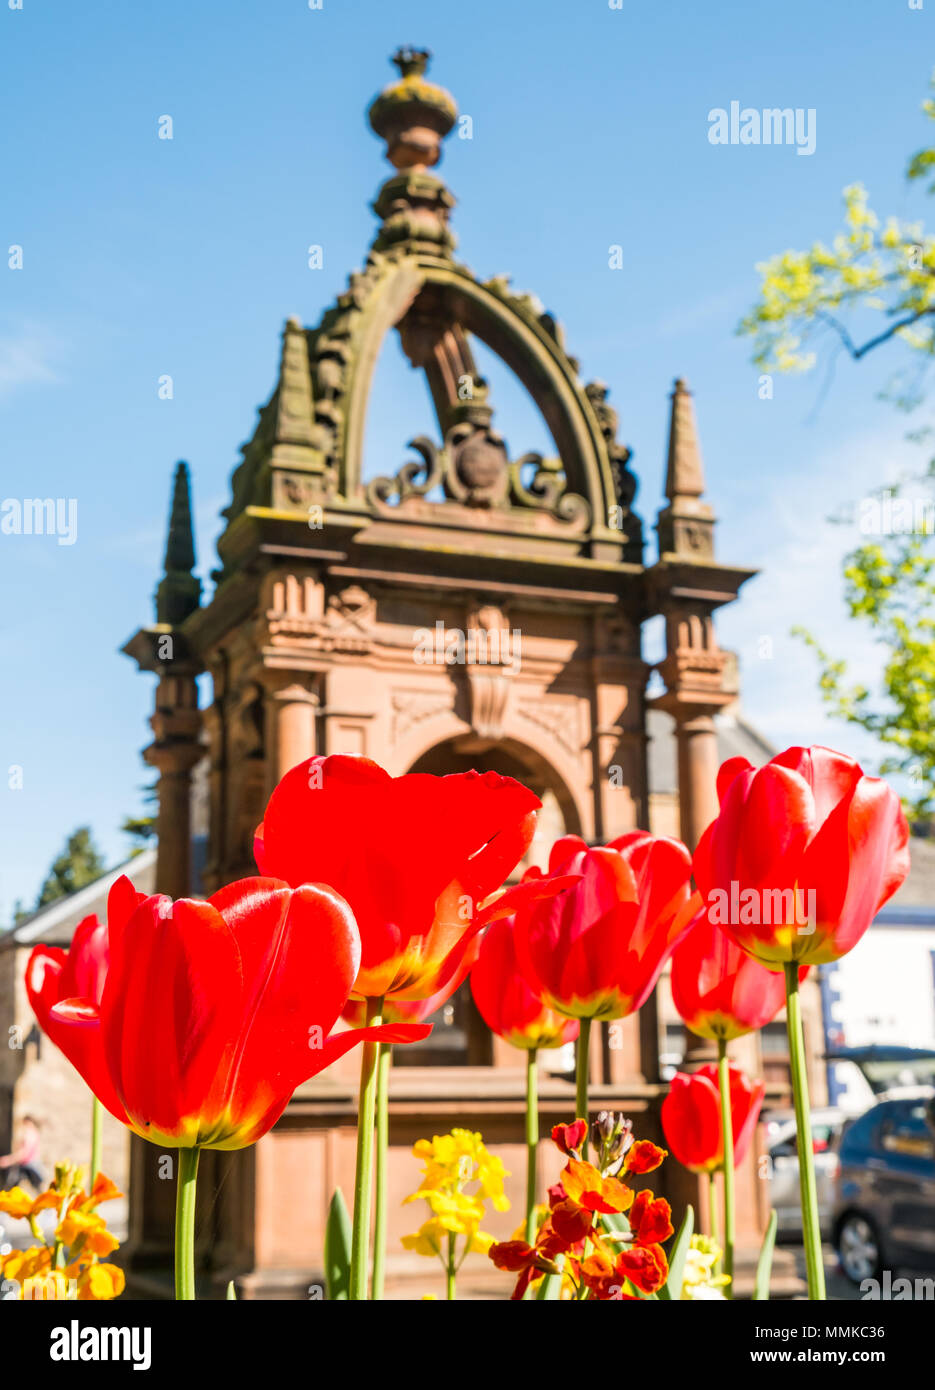 Place d'Aubigny, Court Street, Haddington, East Lothian, Scotland, United Kingdom, 12th May 2018.  The town's flower boxes are full of colourful red tulips on a beautiful sunny day. The ornate Victorian memorial to the Marquis of Tweedsdale is in the background Stock Photo